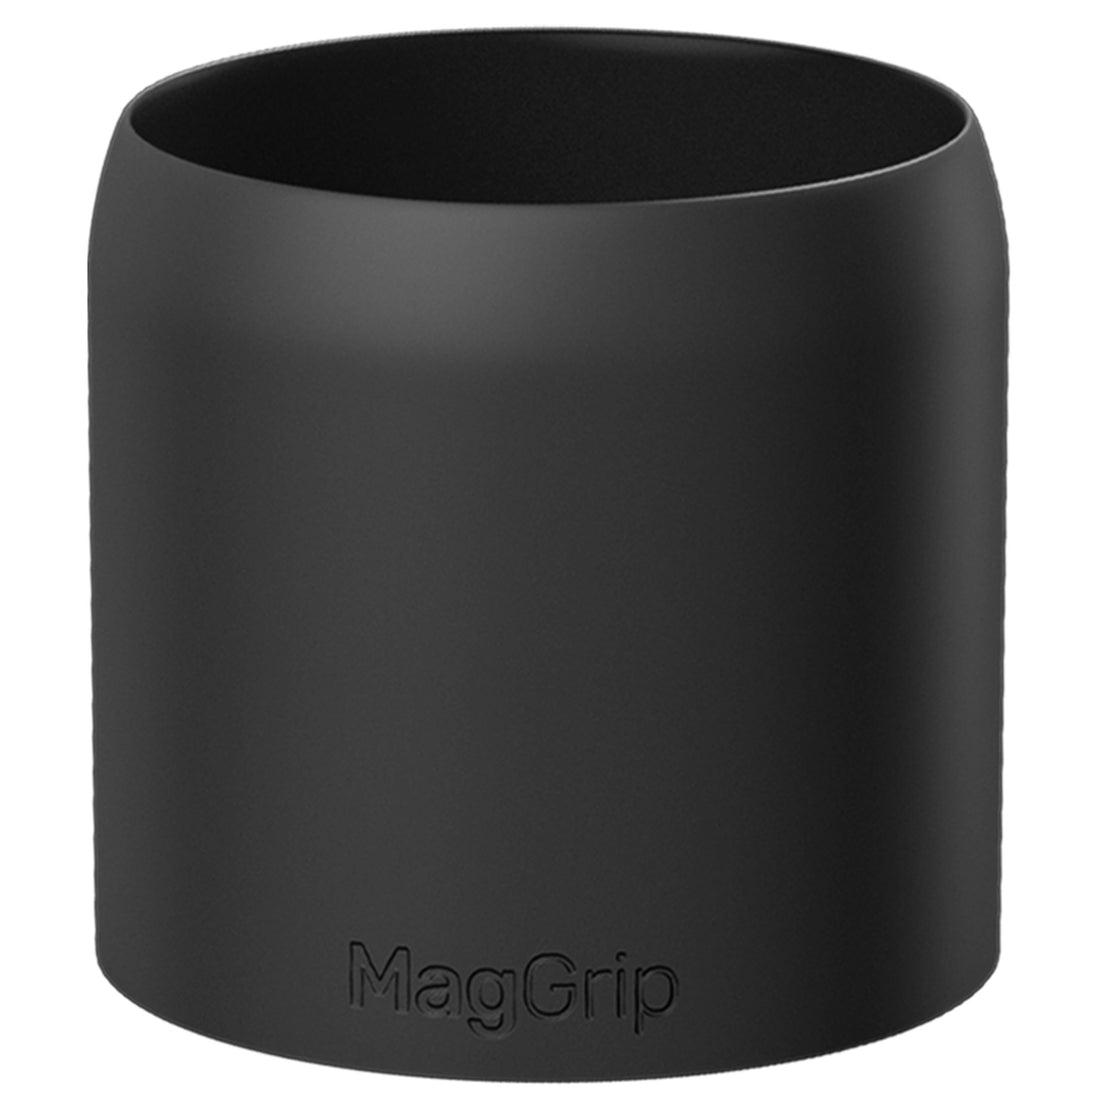 MagGrip Magnetic Silicone Spice Jar Grips - Black